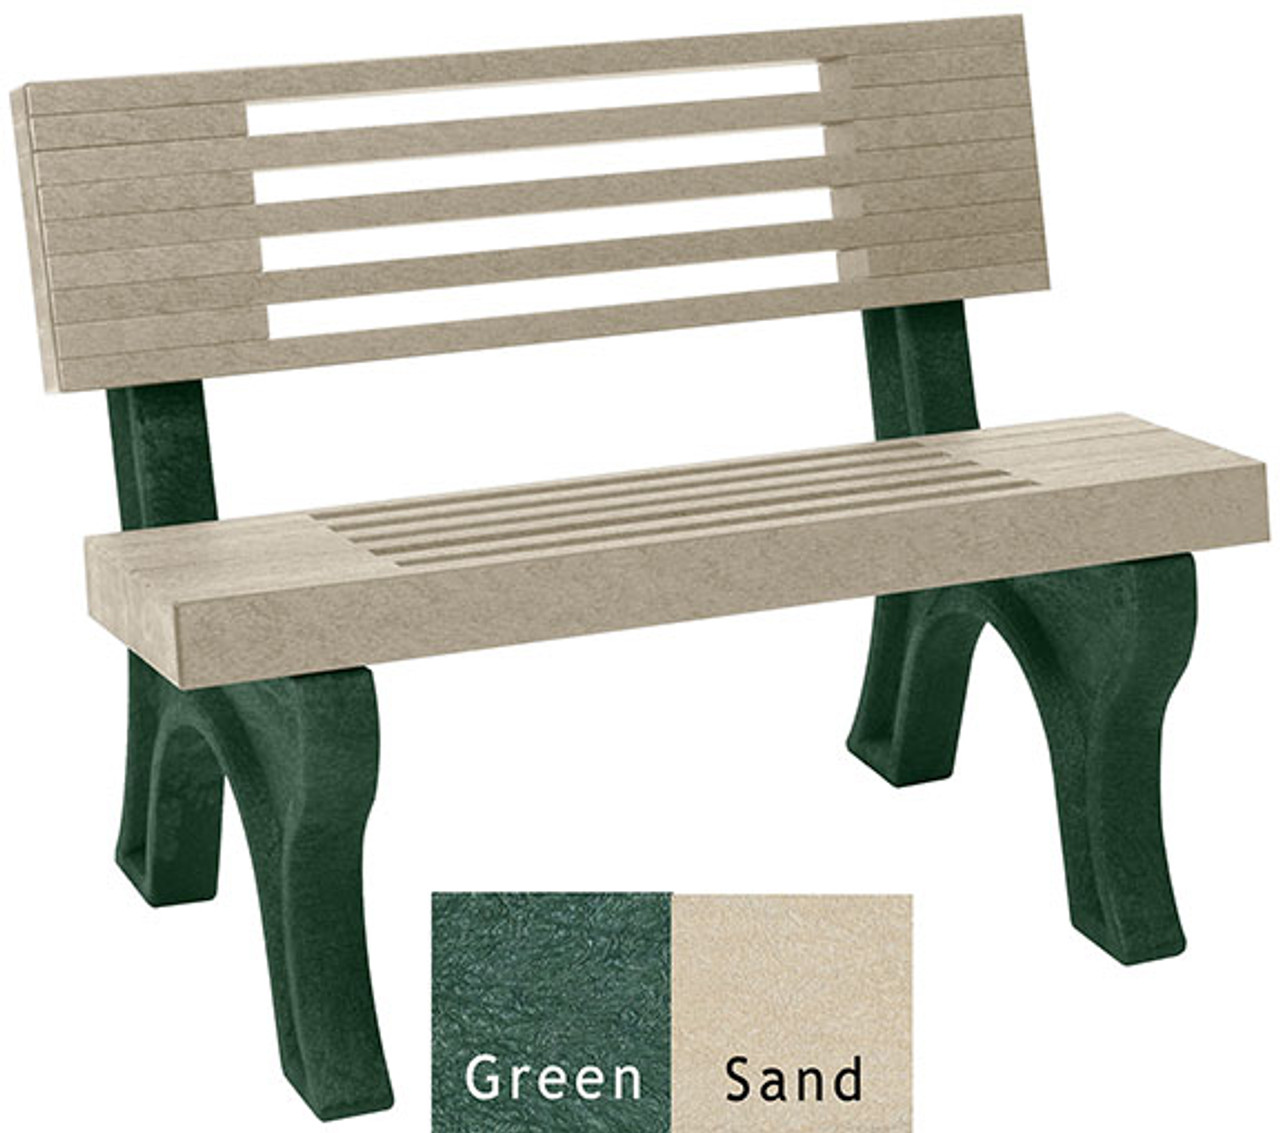 Green and Sand